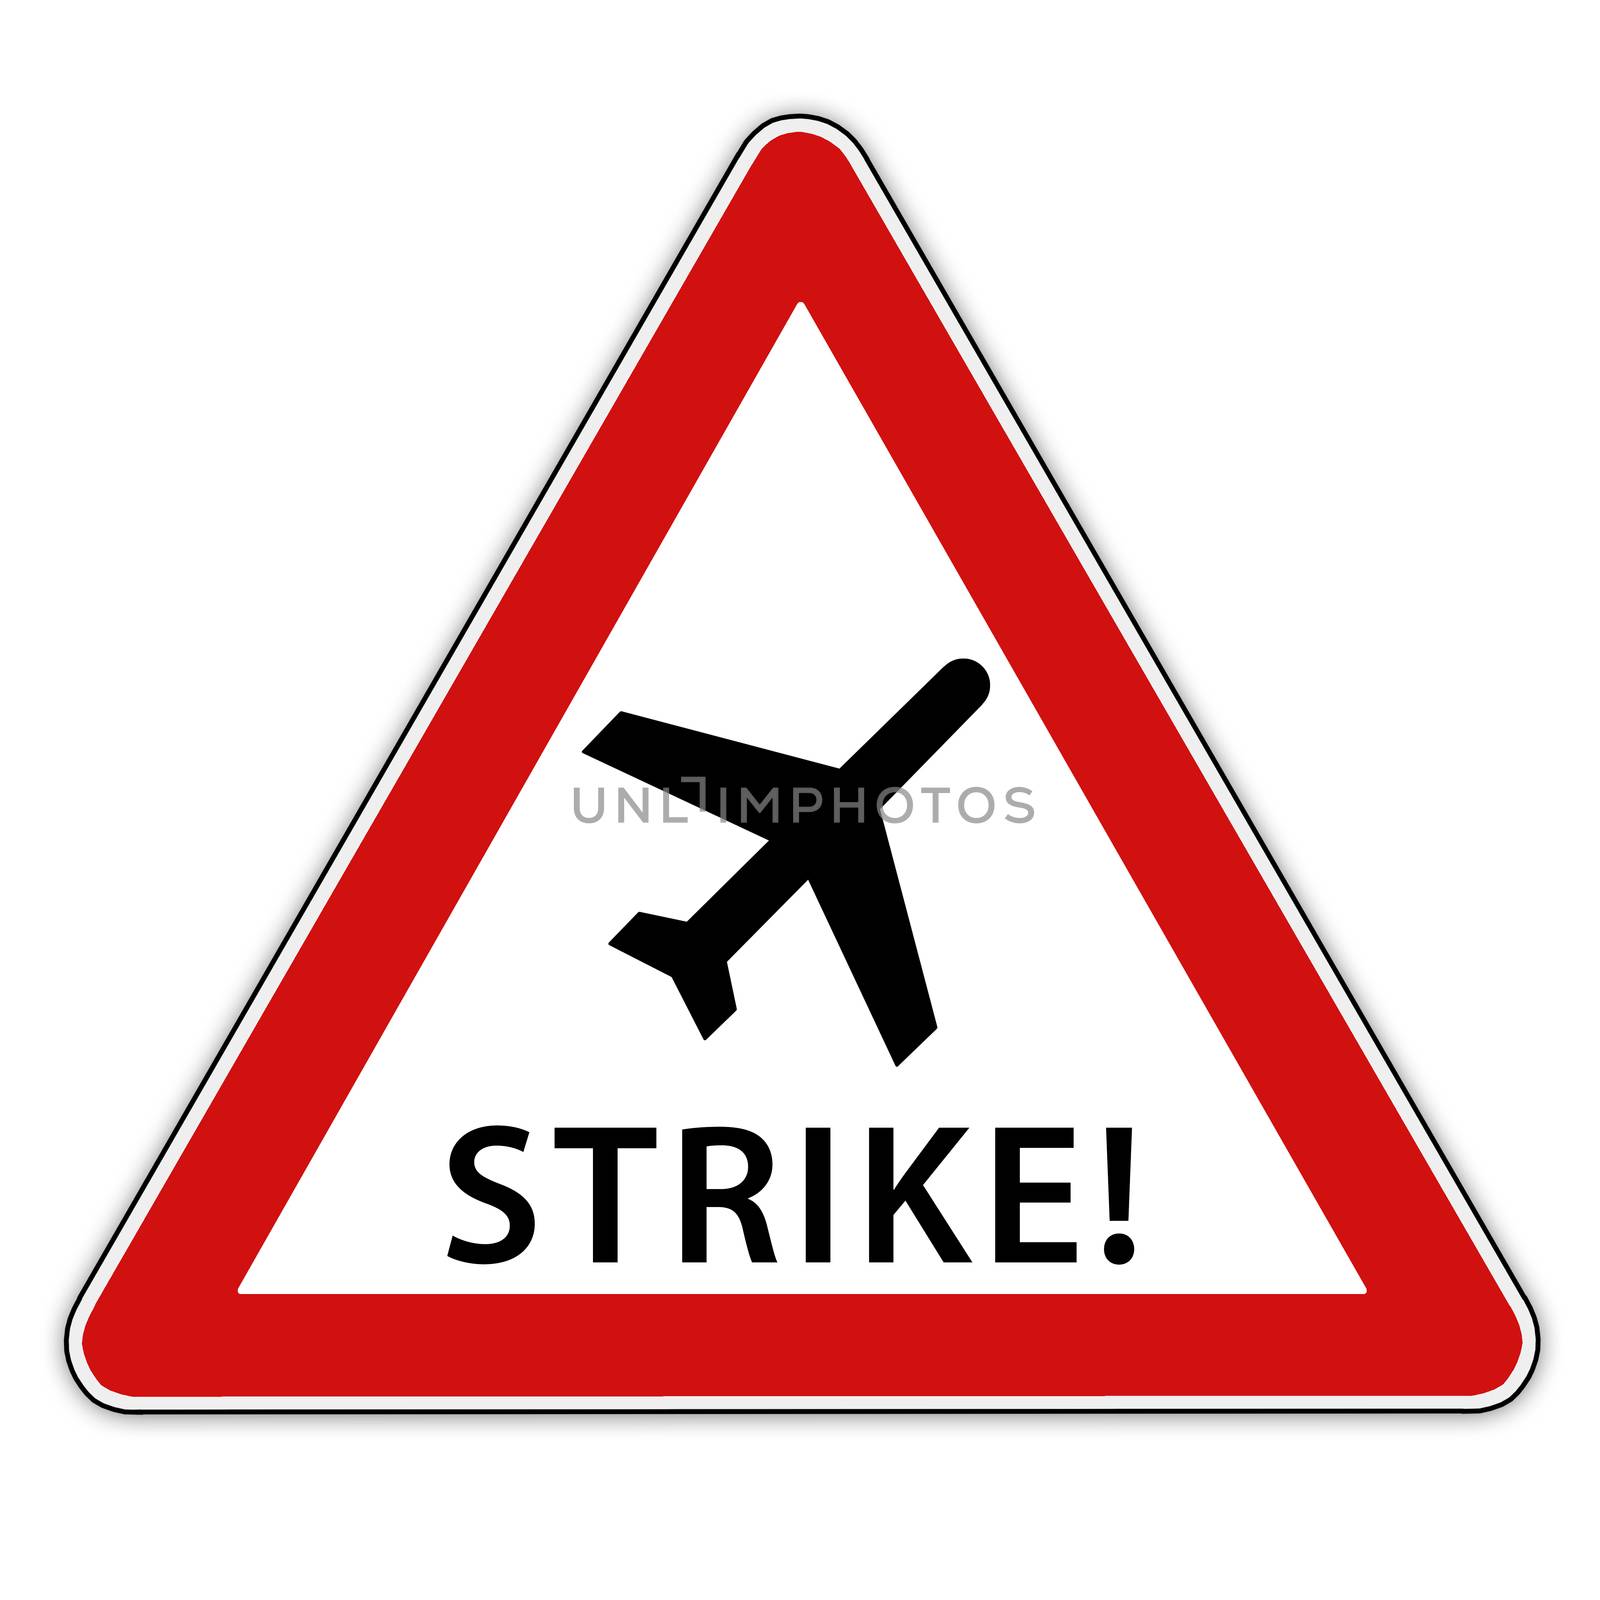 Isolated red / white traffic sign with airplane symbolic for strike